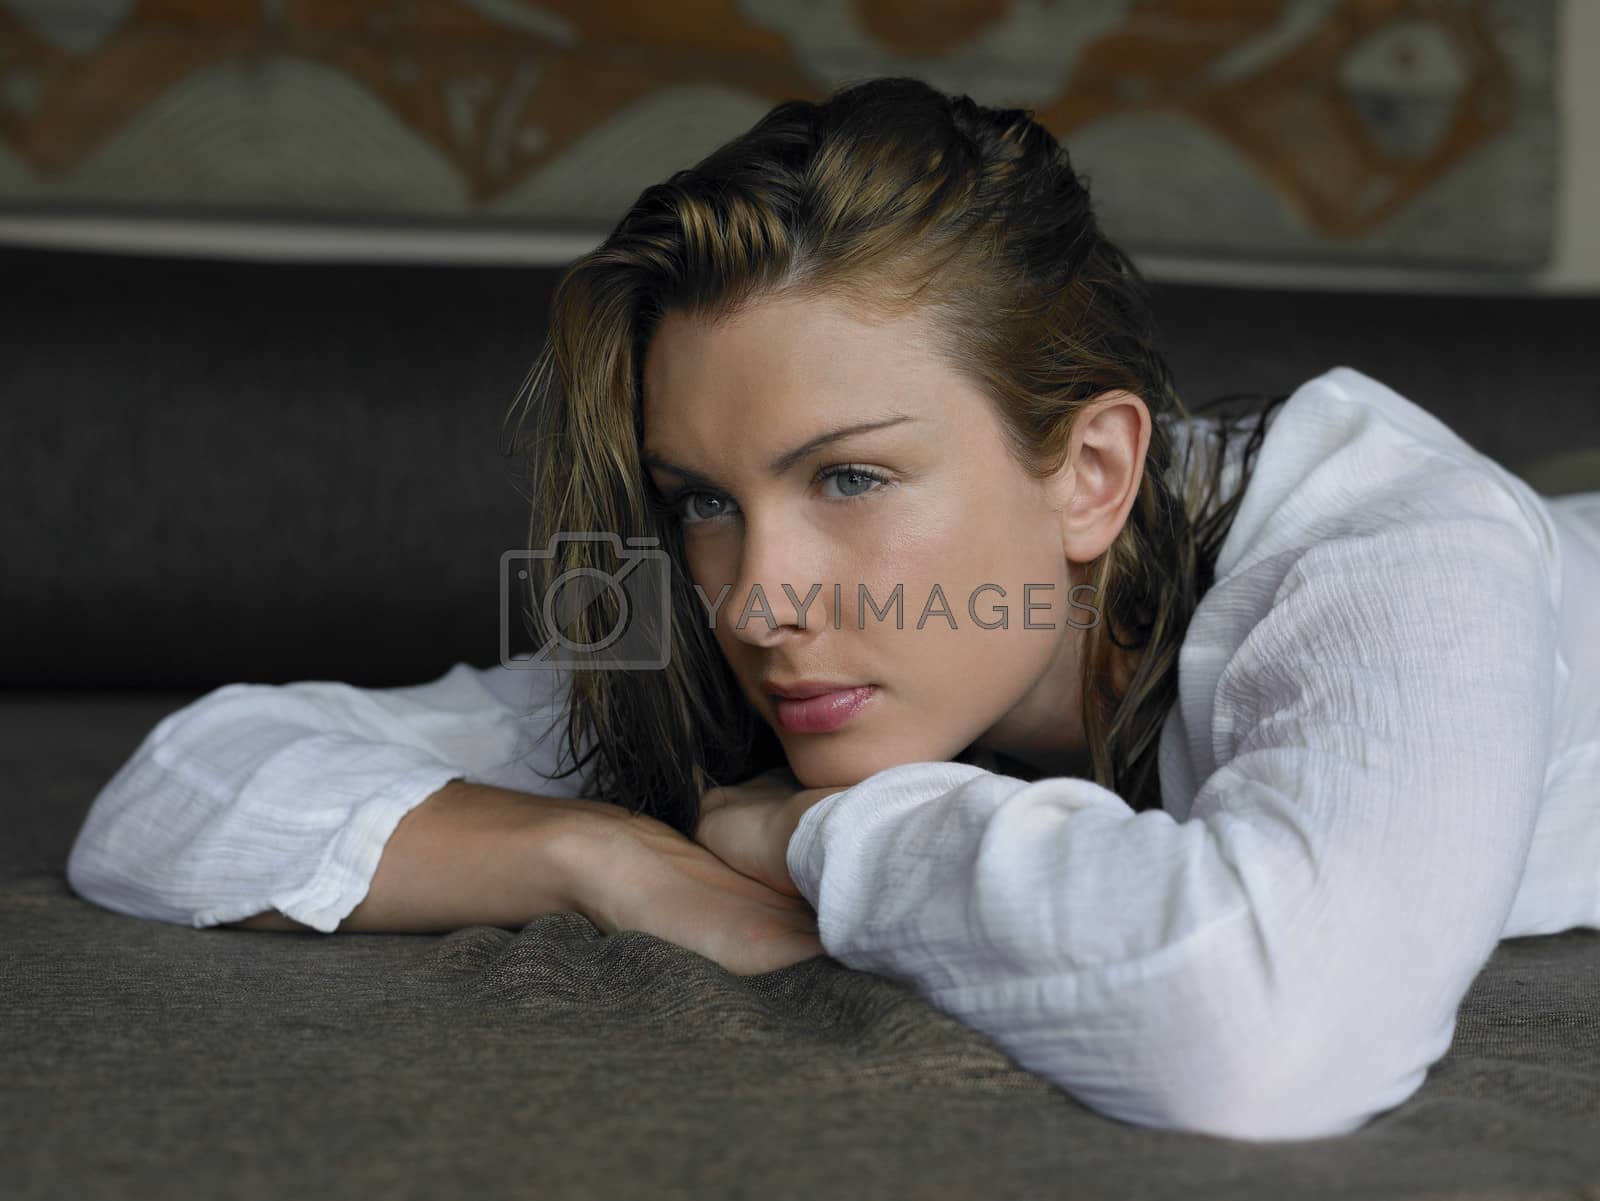 Royalty free image of Young Woman Lying on Bed by moodboard